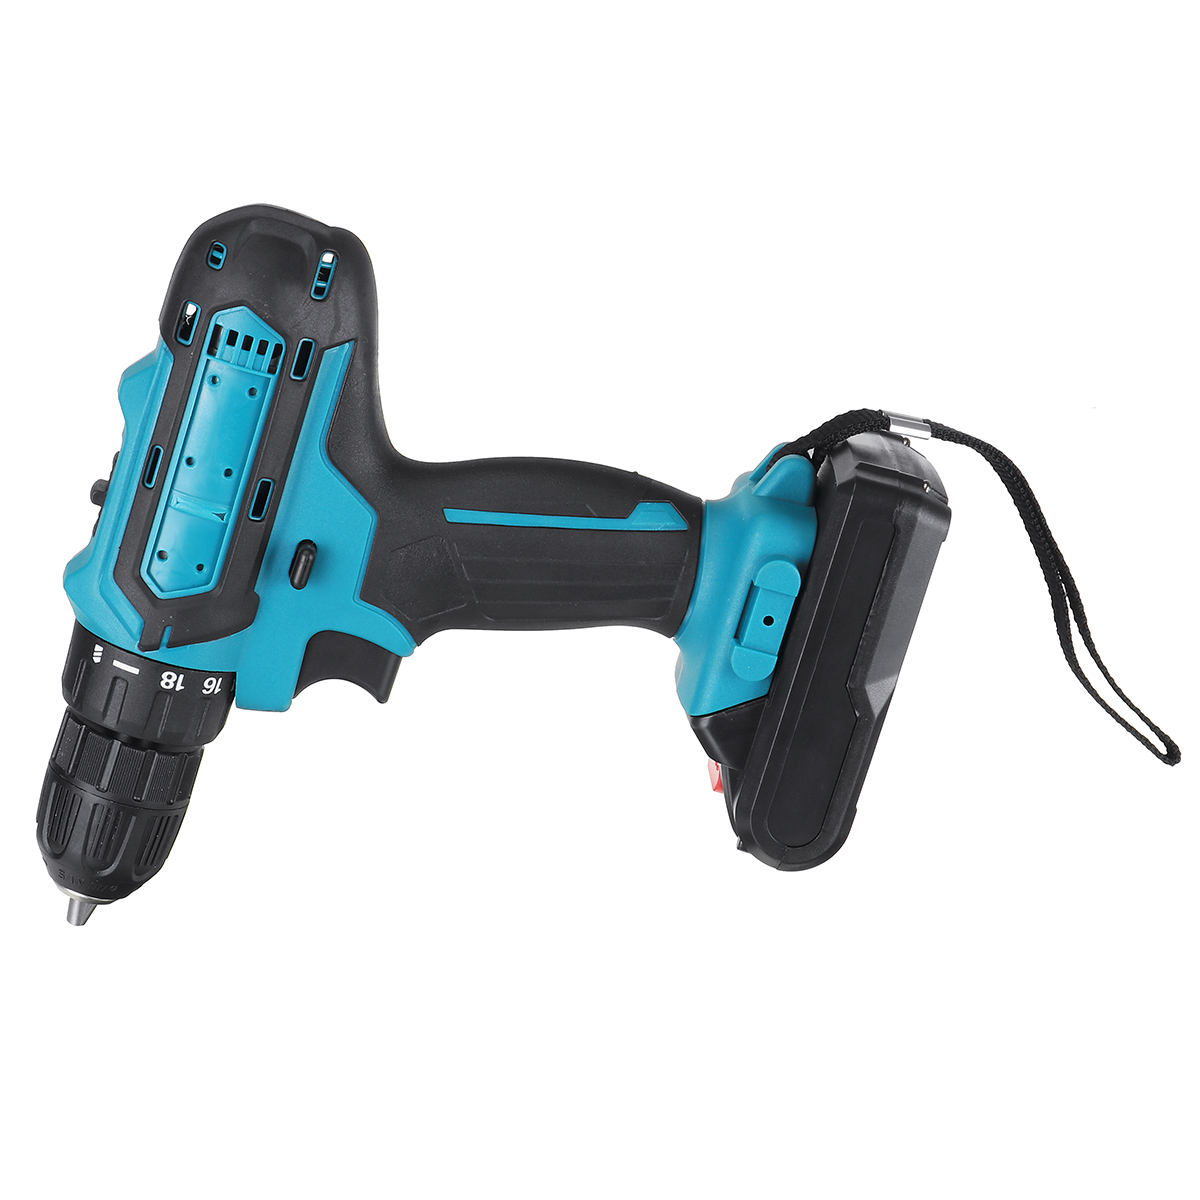 2000rpm-38Nm-21V-Lithium-Electric-Impact-Hammer-Drill-Wood-Drilling-Screwdrivers-with-Battery-1943477-20